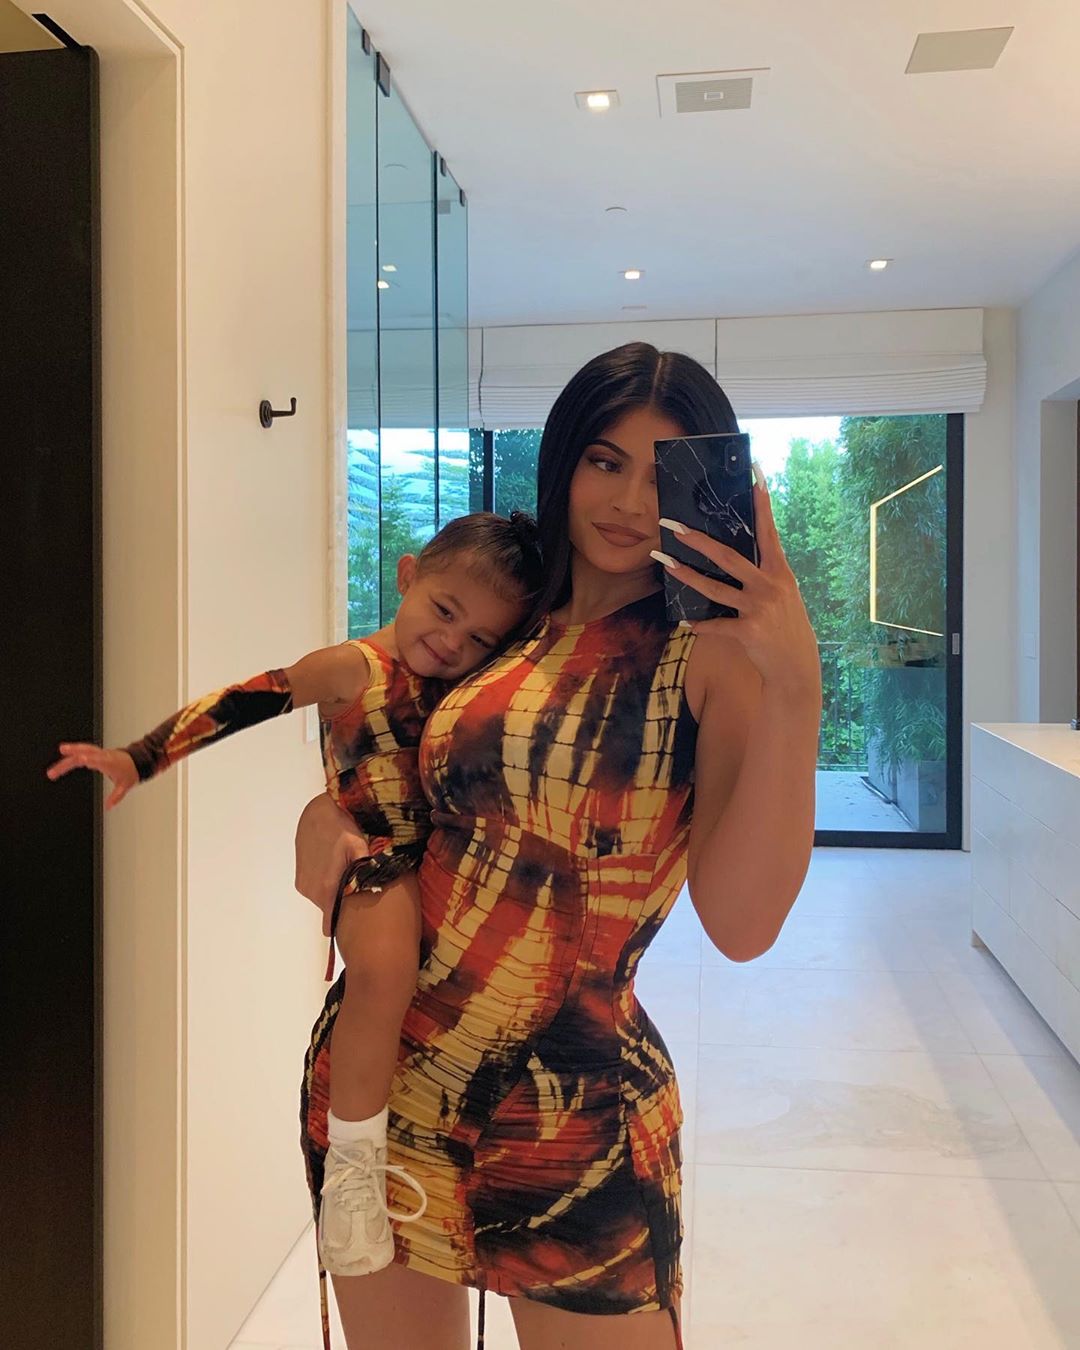 Has Kylie Jenner Beckoned The End Of Instagram?